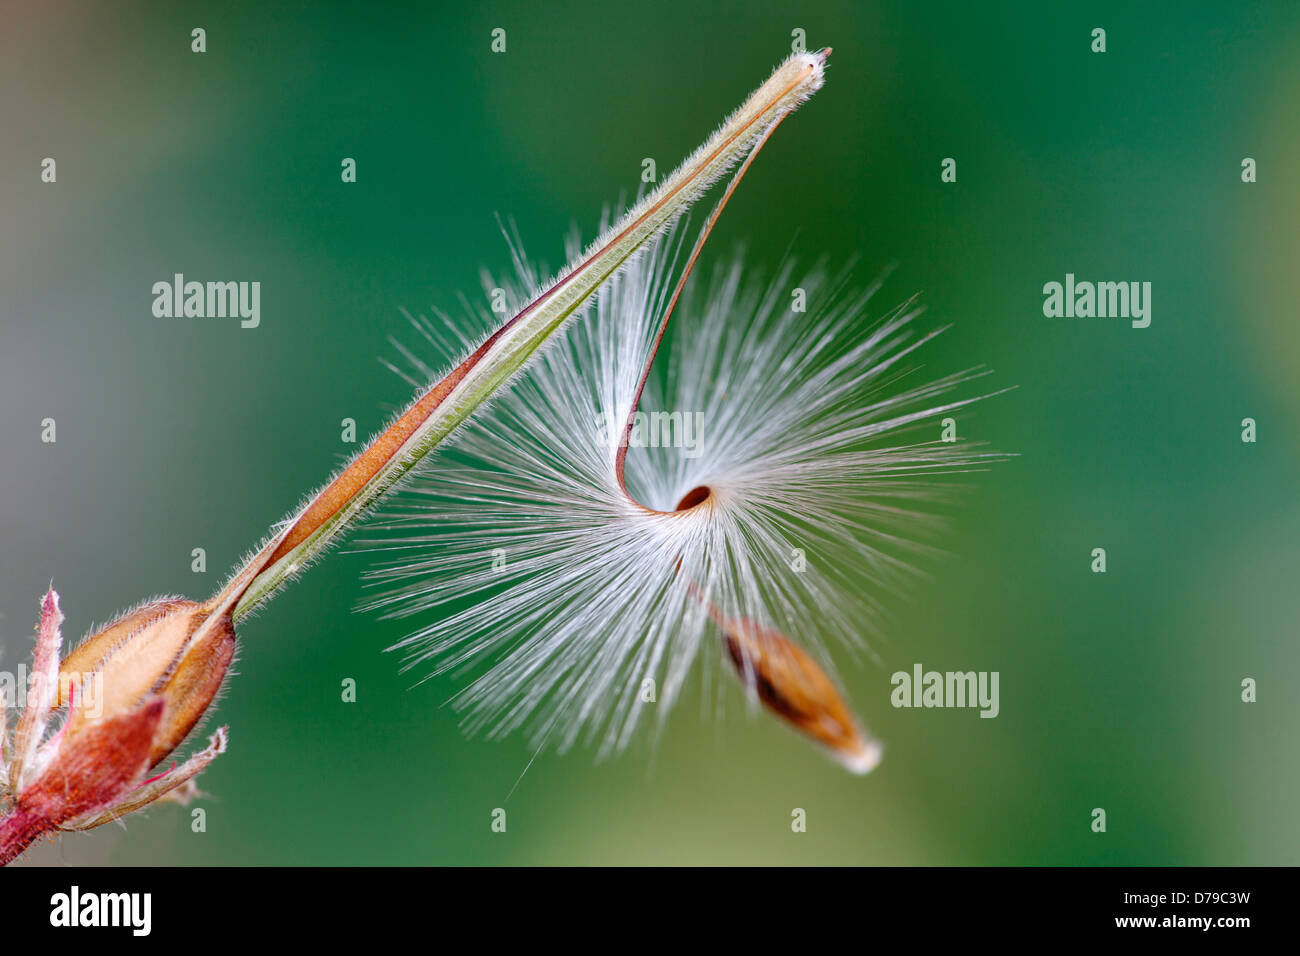 Seed head of Pelargoium x hortorum with curved stem of fine hairs to aid wind dispersal. Stock Photo